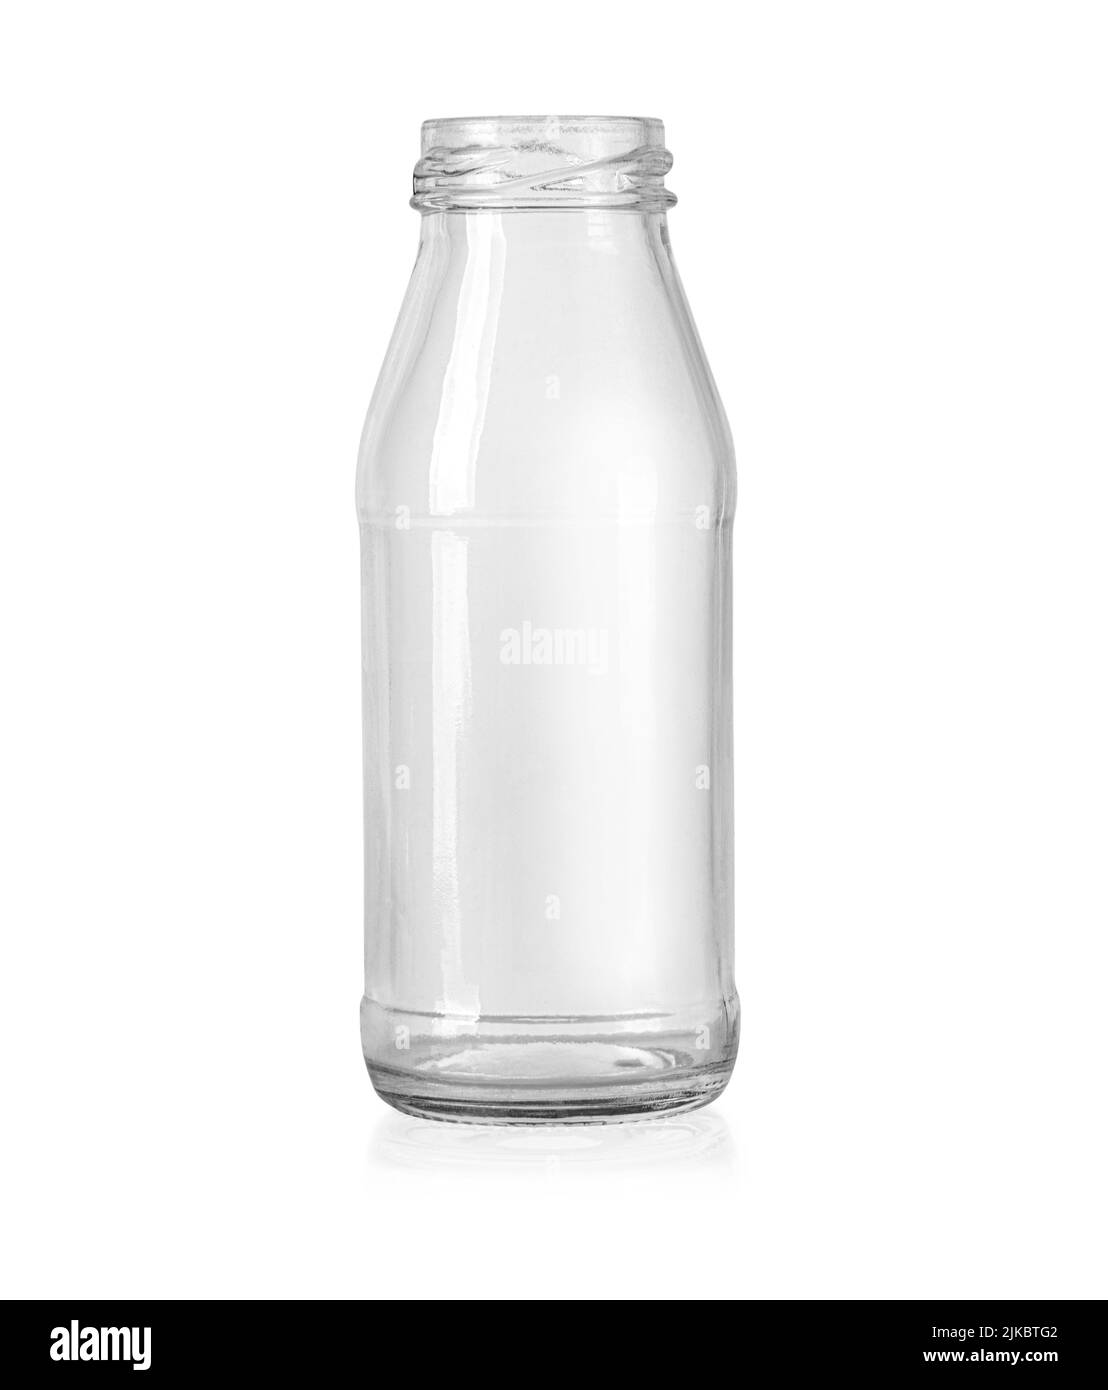 https://c8.alamy.com/comp/2JKBTG2/empty-glass-bottle-isolated-on-white-with-clipping-path-2JKBTG2.jpg